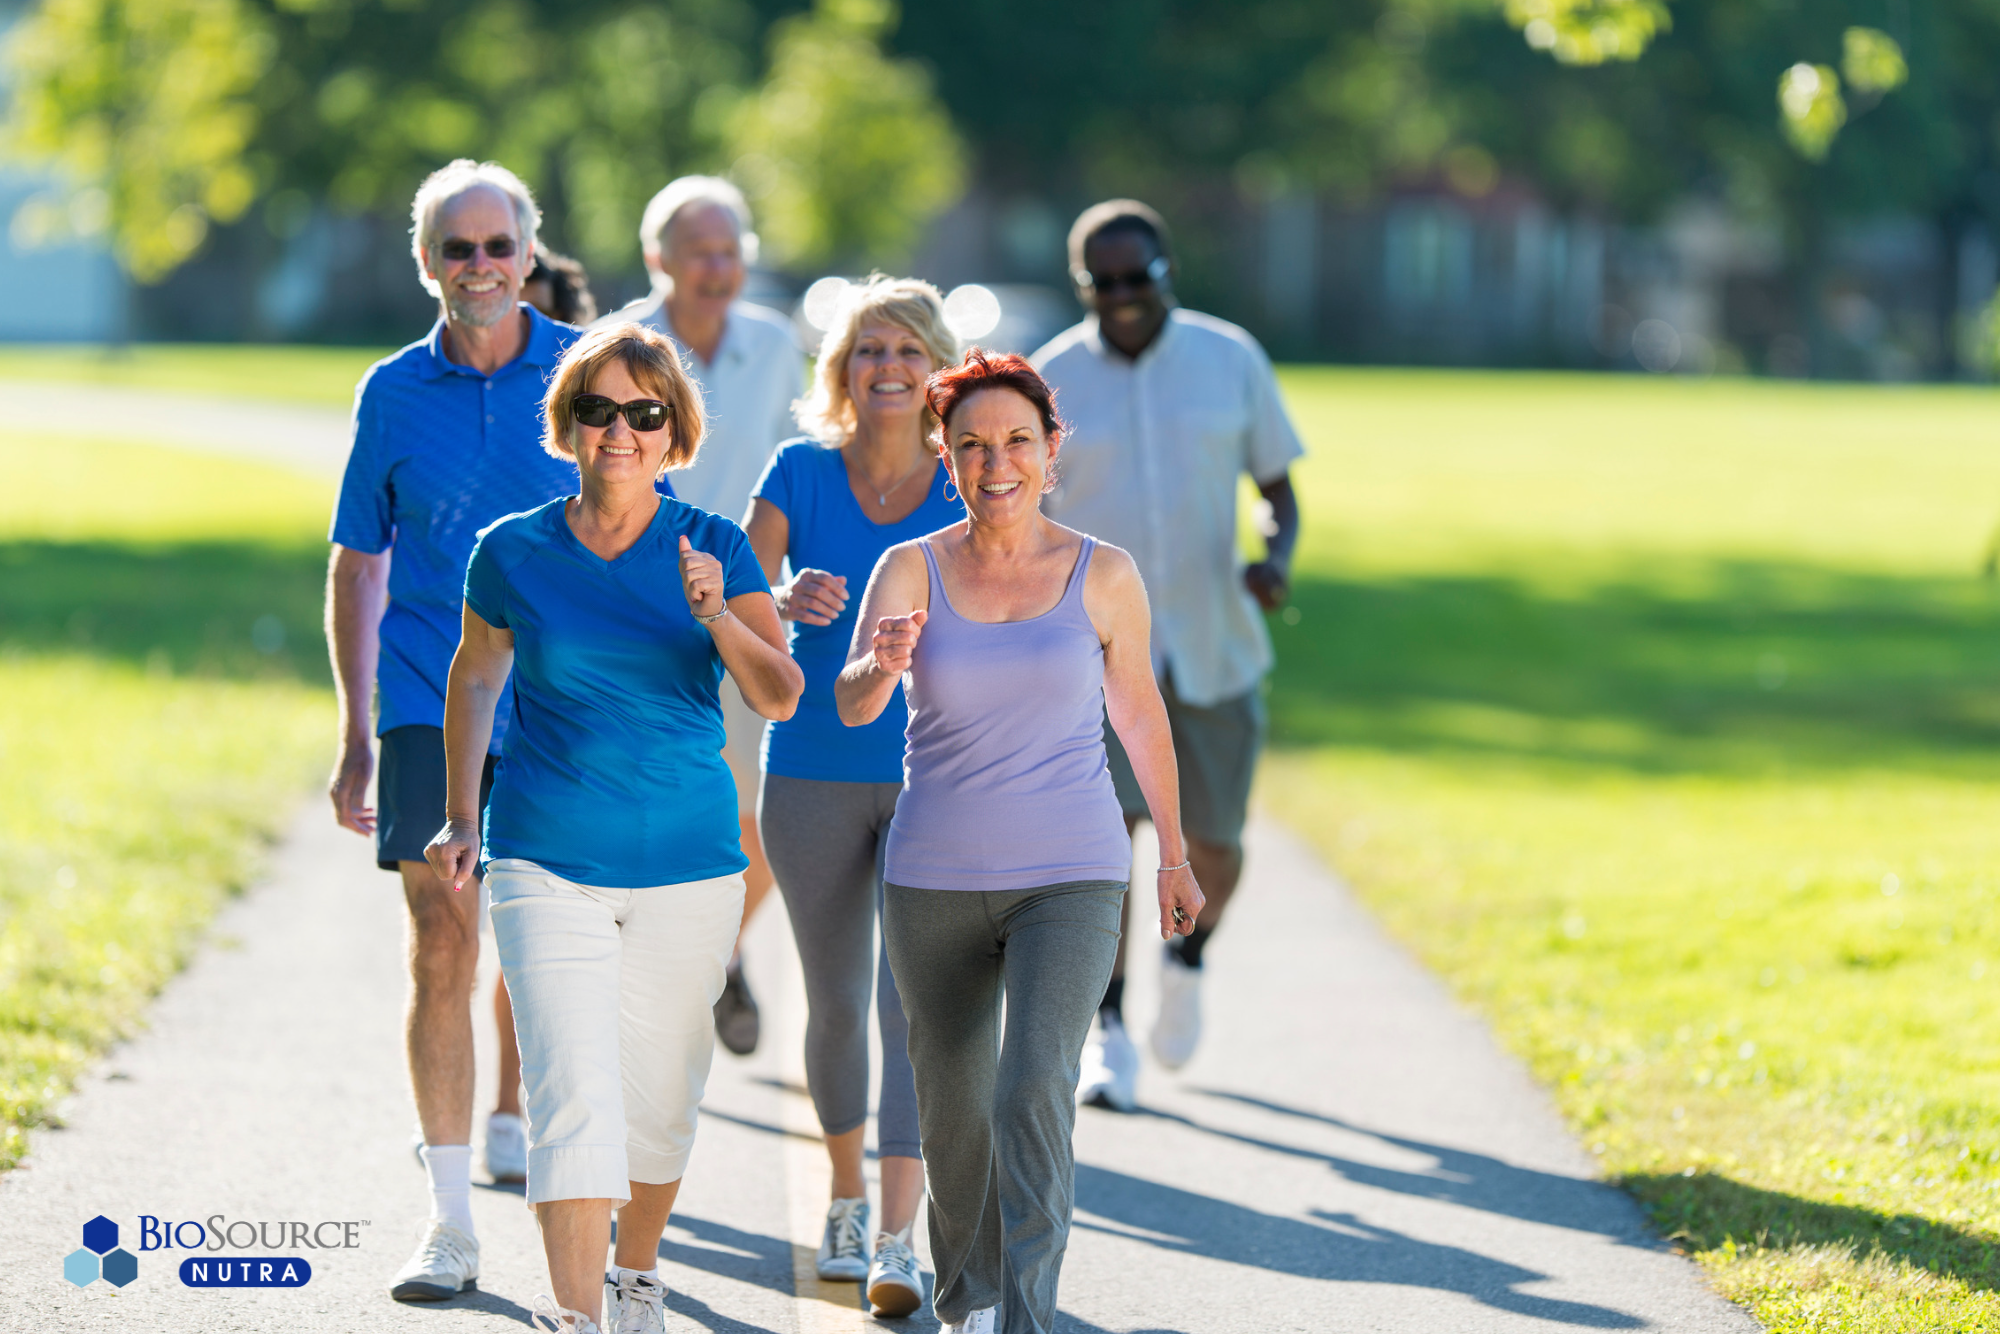 A group of people are walking for exercise